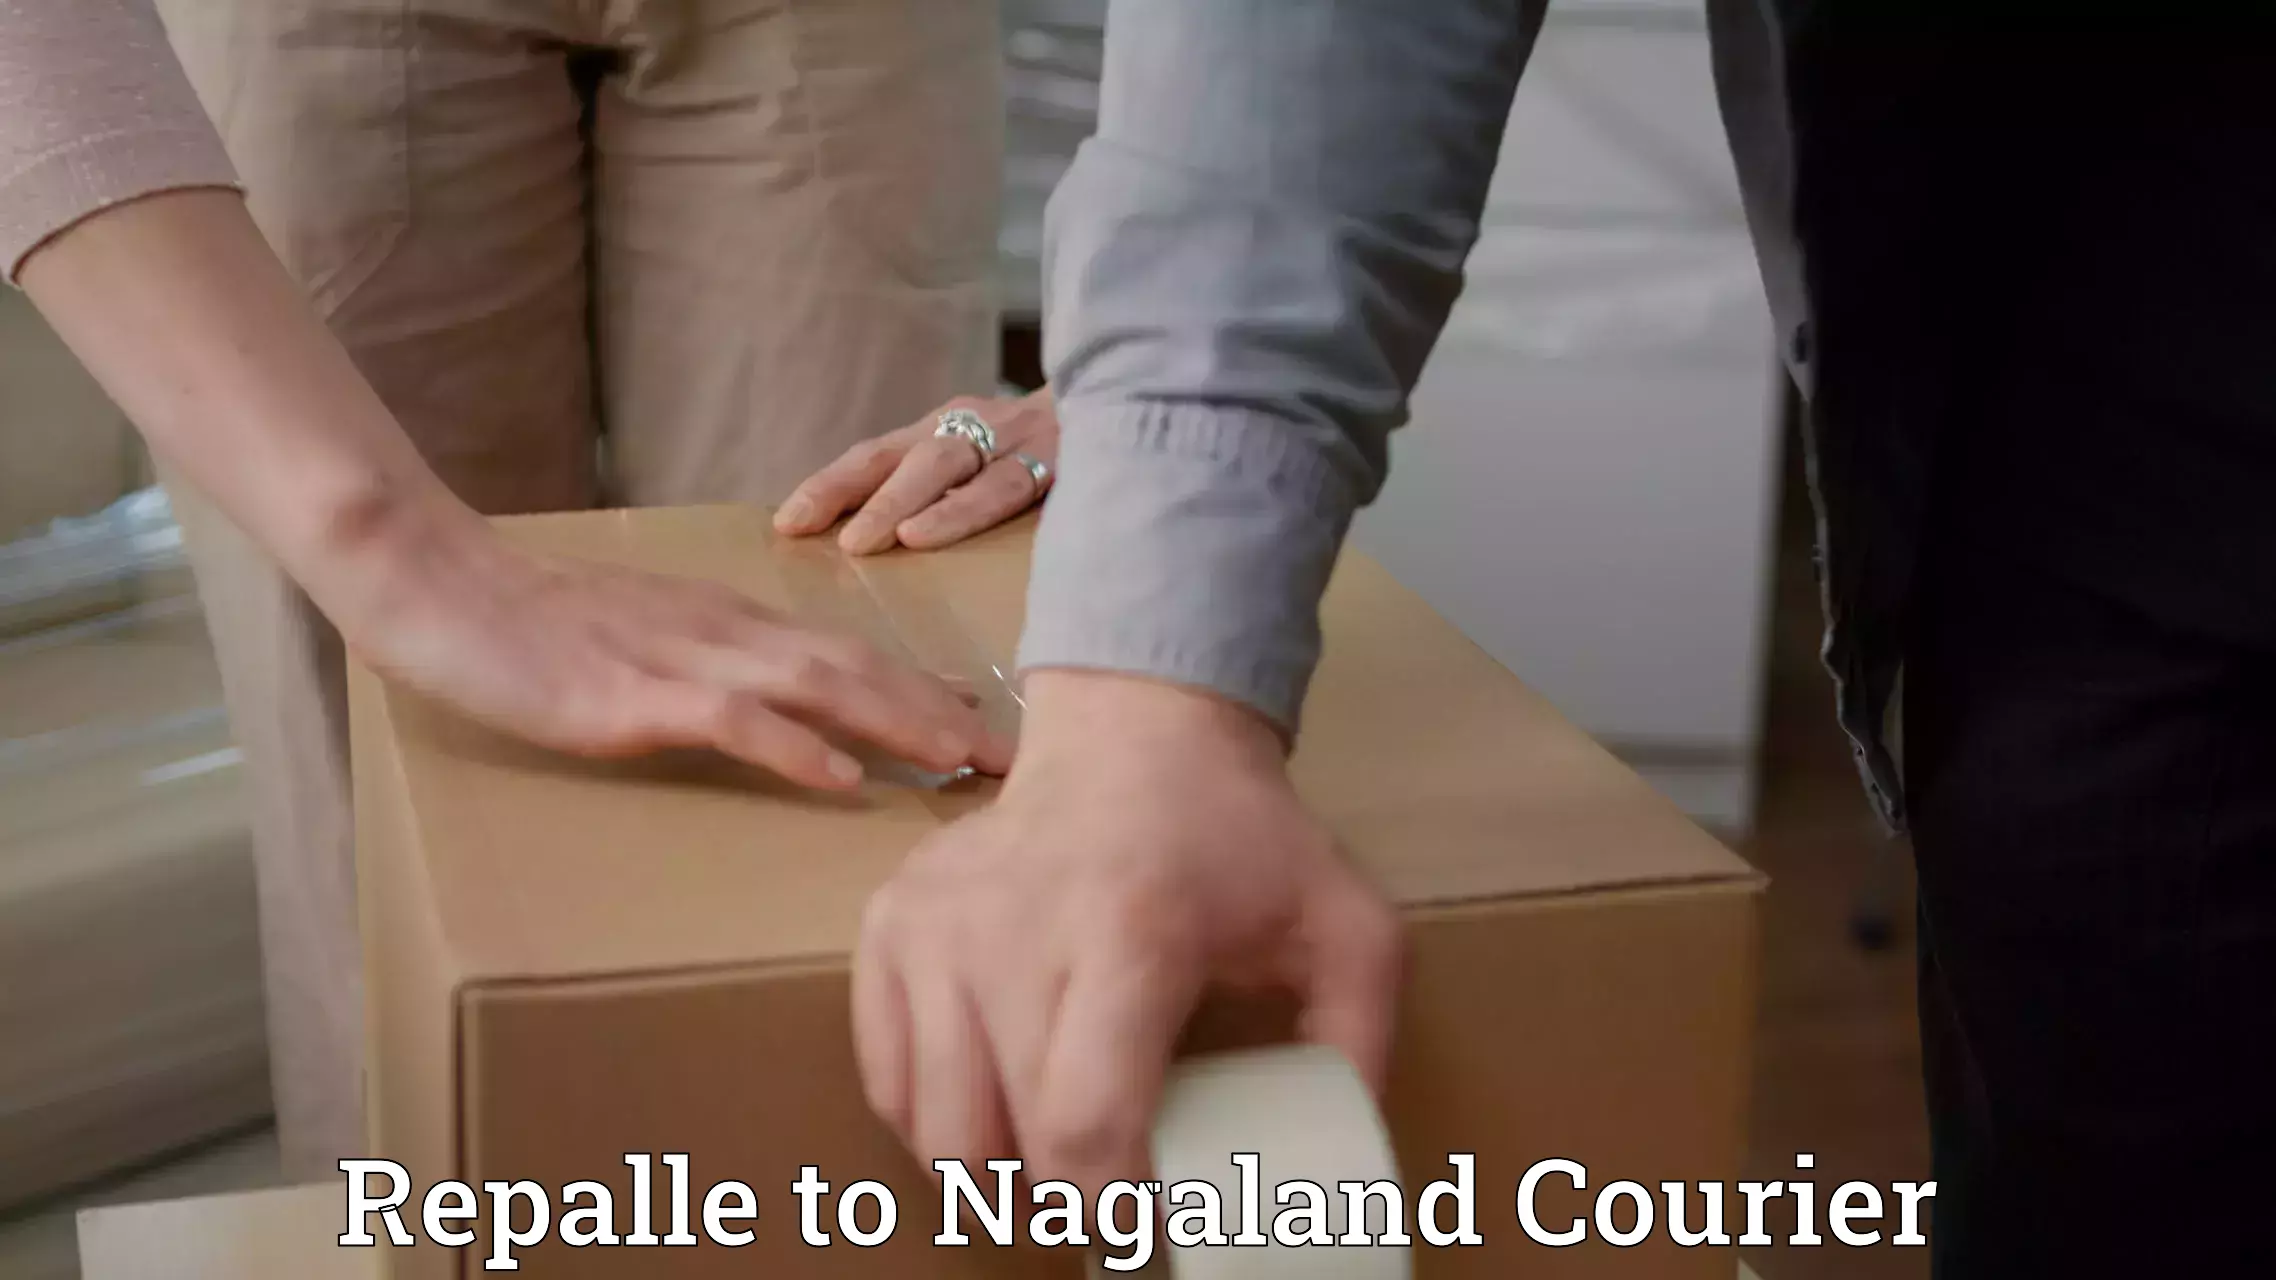 Luggage shipment tracking Repalle to Nagaland